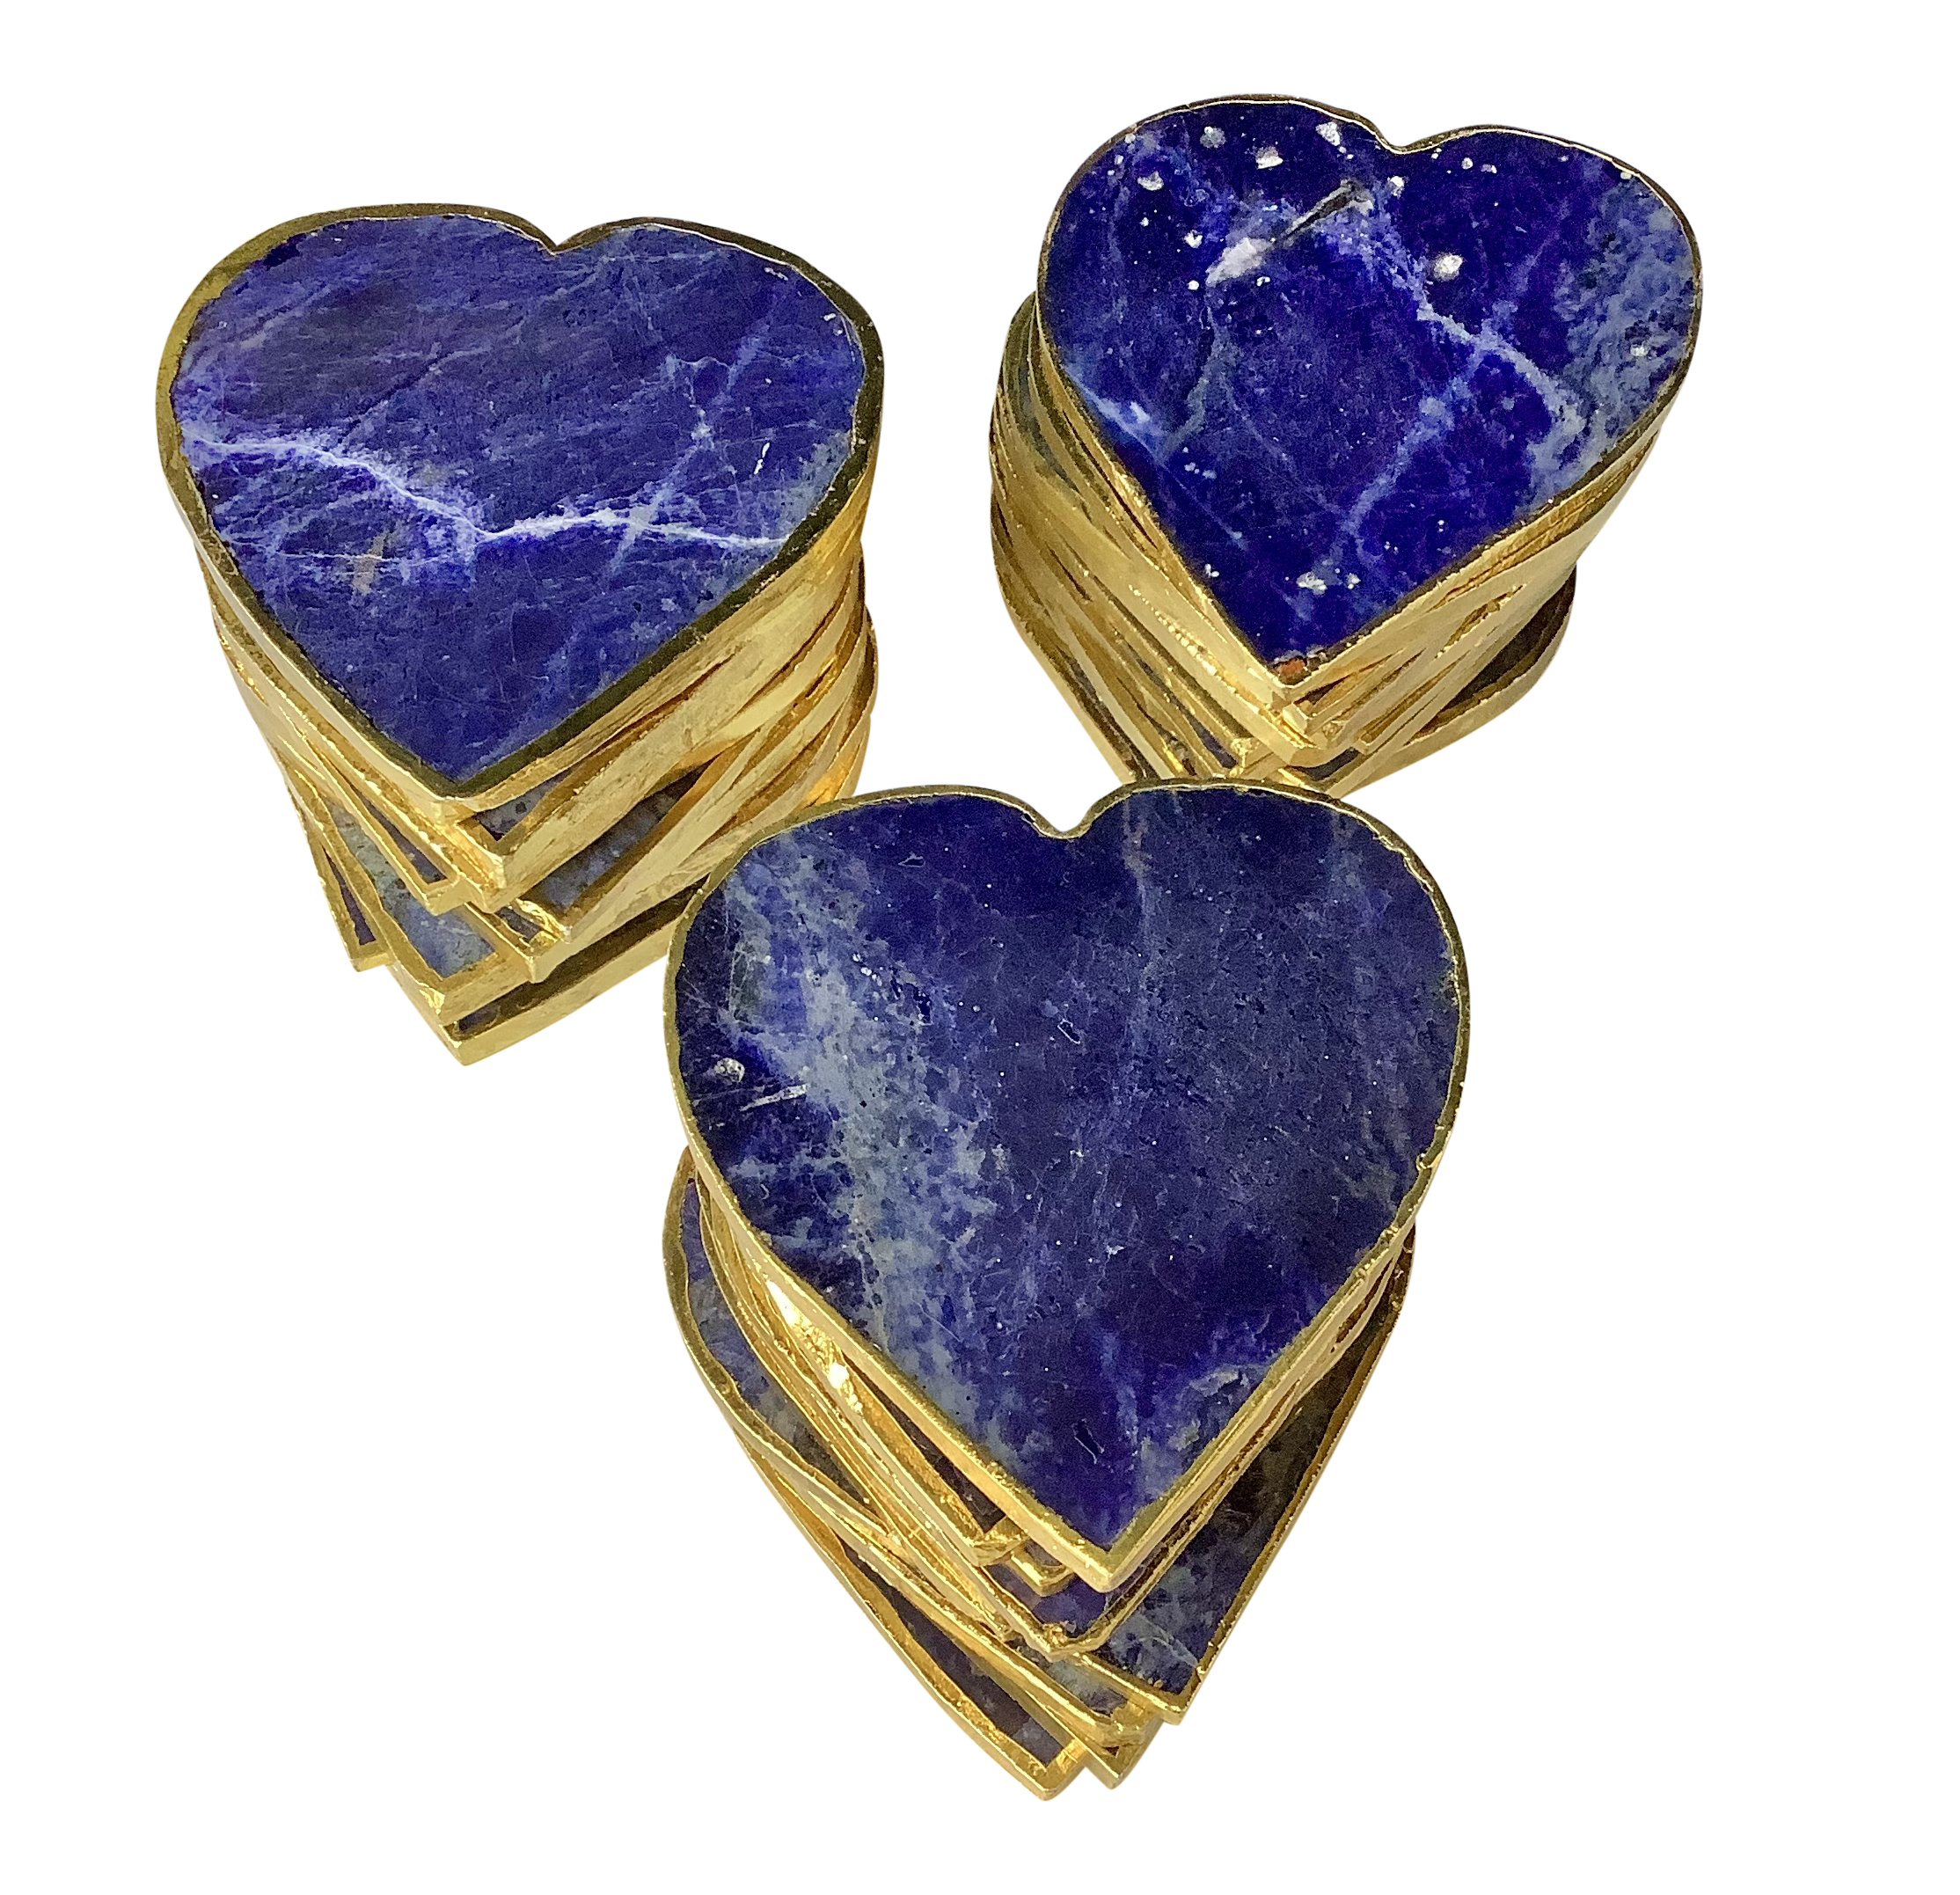 Sodalite Crystal Coaster Heart Shaped 4 Pieces